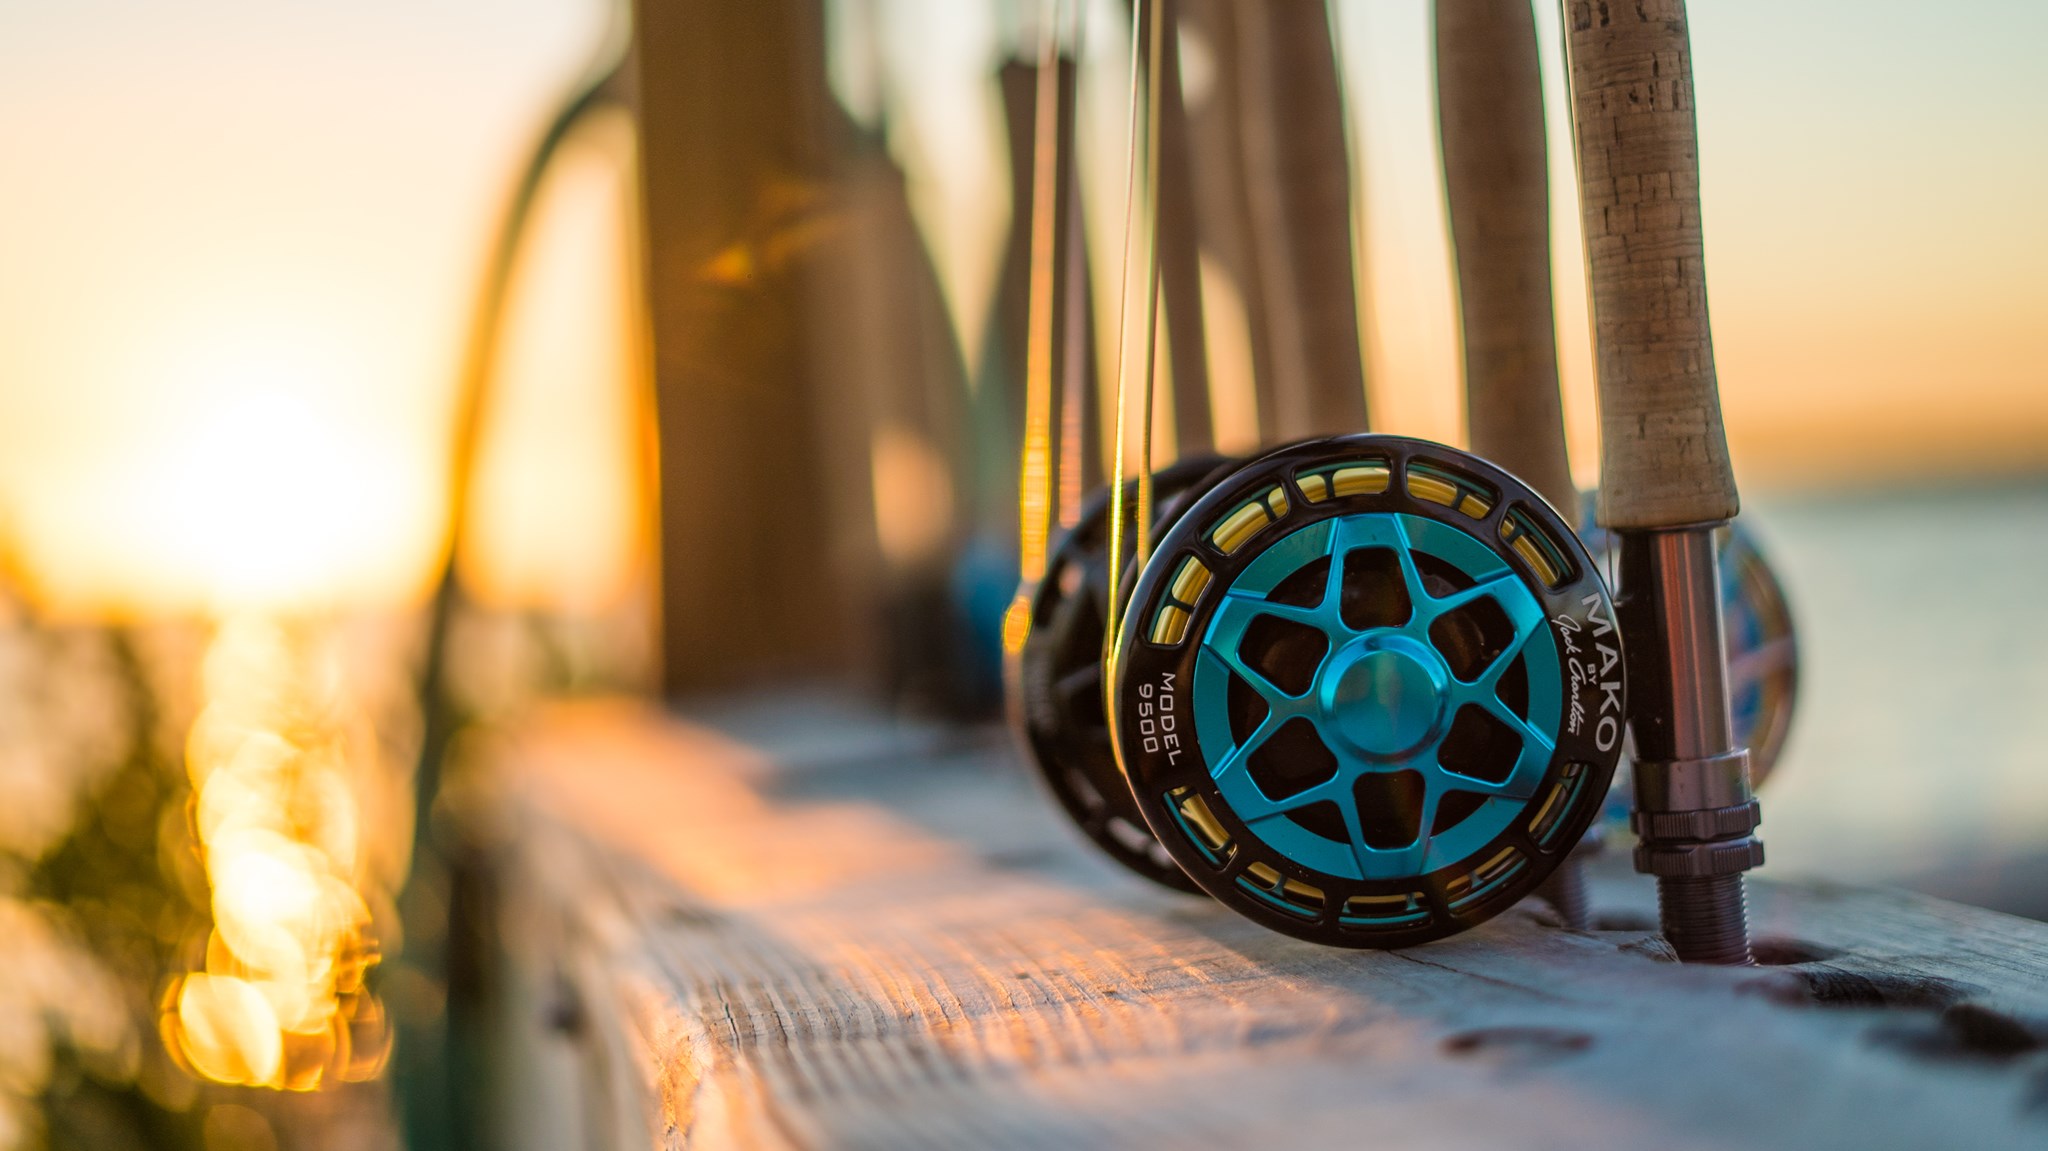 Classic fly reels are designed to accommodate different